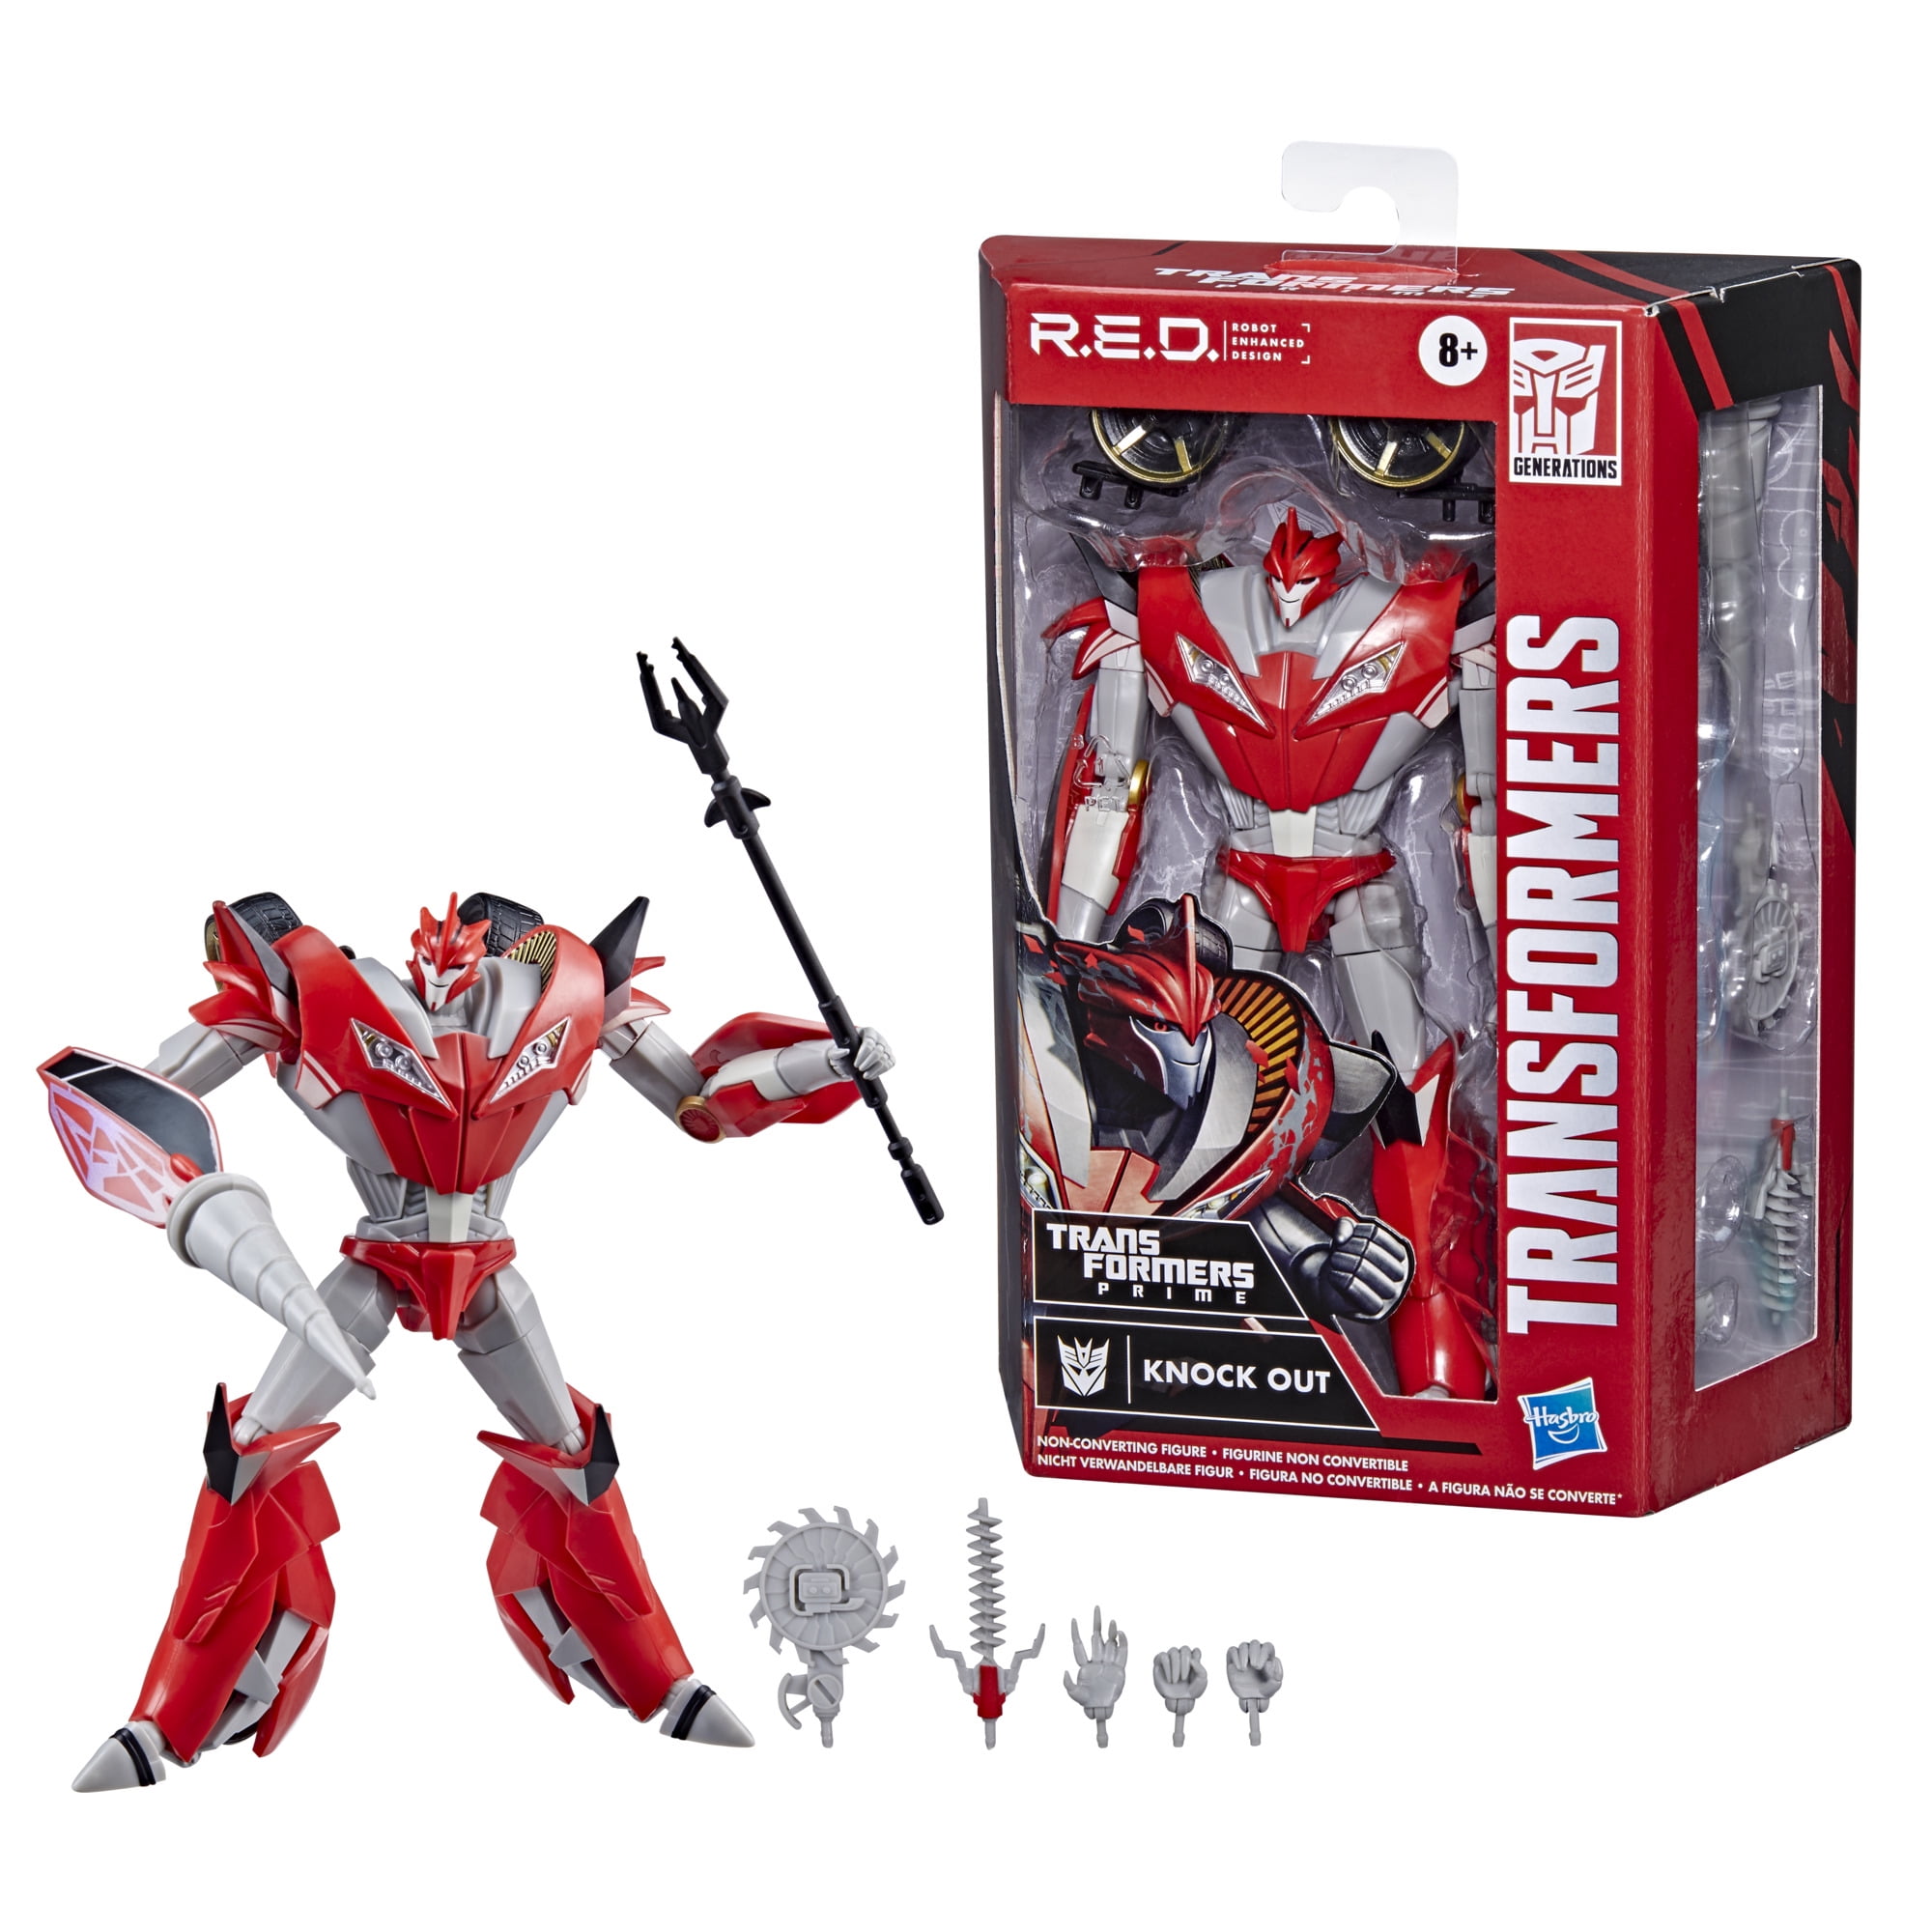 Transformers Cassette Cases Set Of 4 Red 